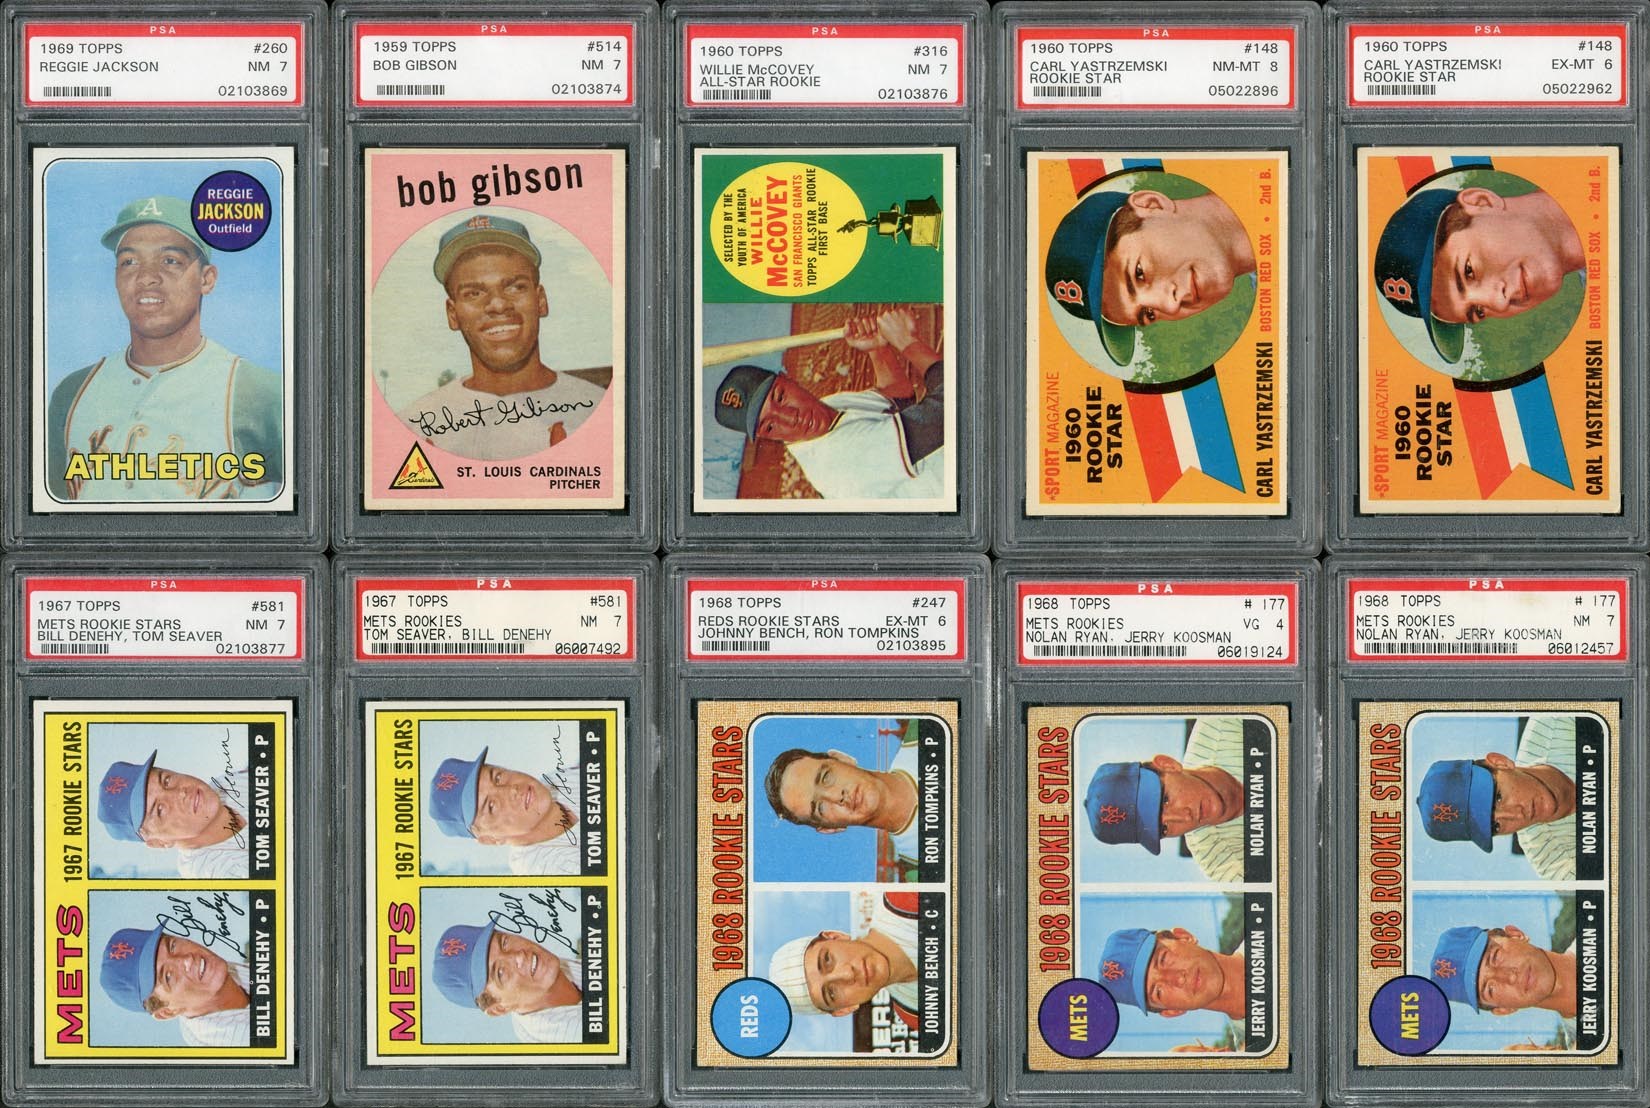 Baseball and Trading Cards - High Grade 1960s Topps Important Rookies PSA Graded Collection - Seaver, Ryan, Gibson  (18)